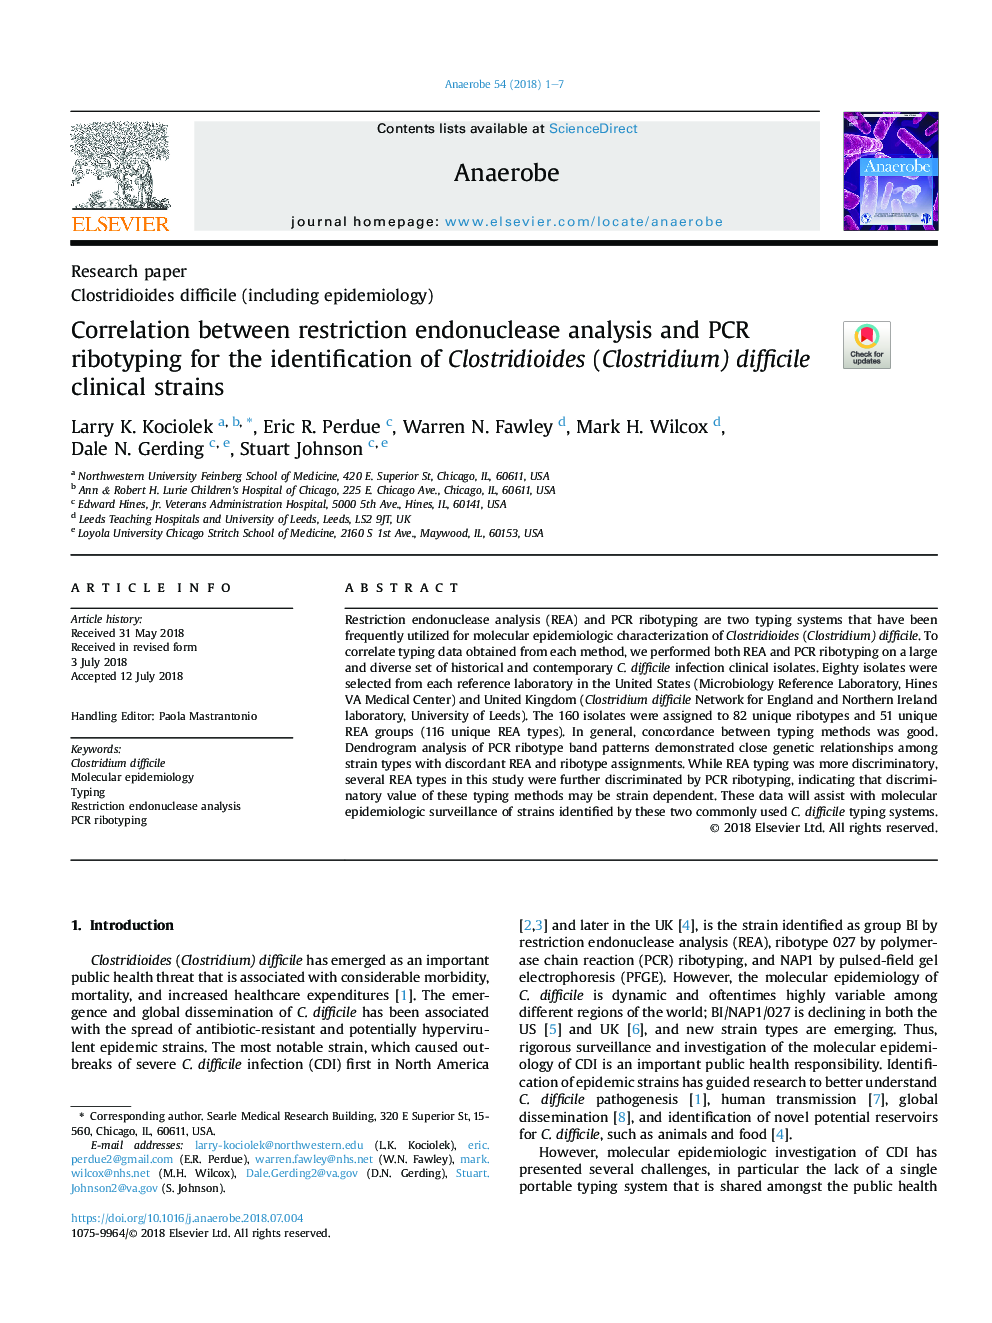 Correlation between restriction endonuclease analysis and PCR ribotyping for the identification of Clostridioides (Clostridium) difficile clinical strains